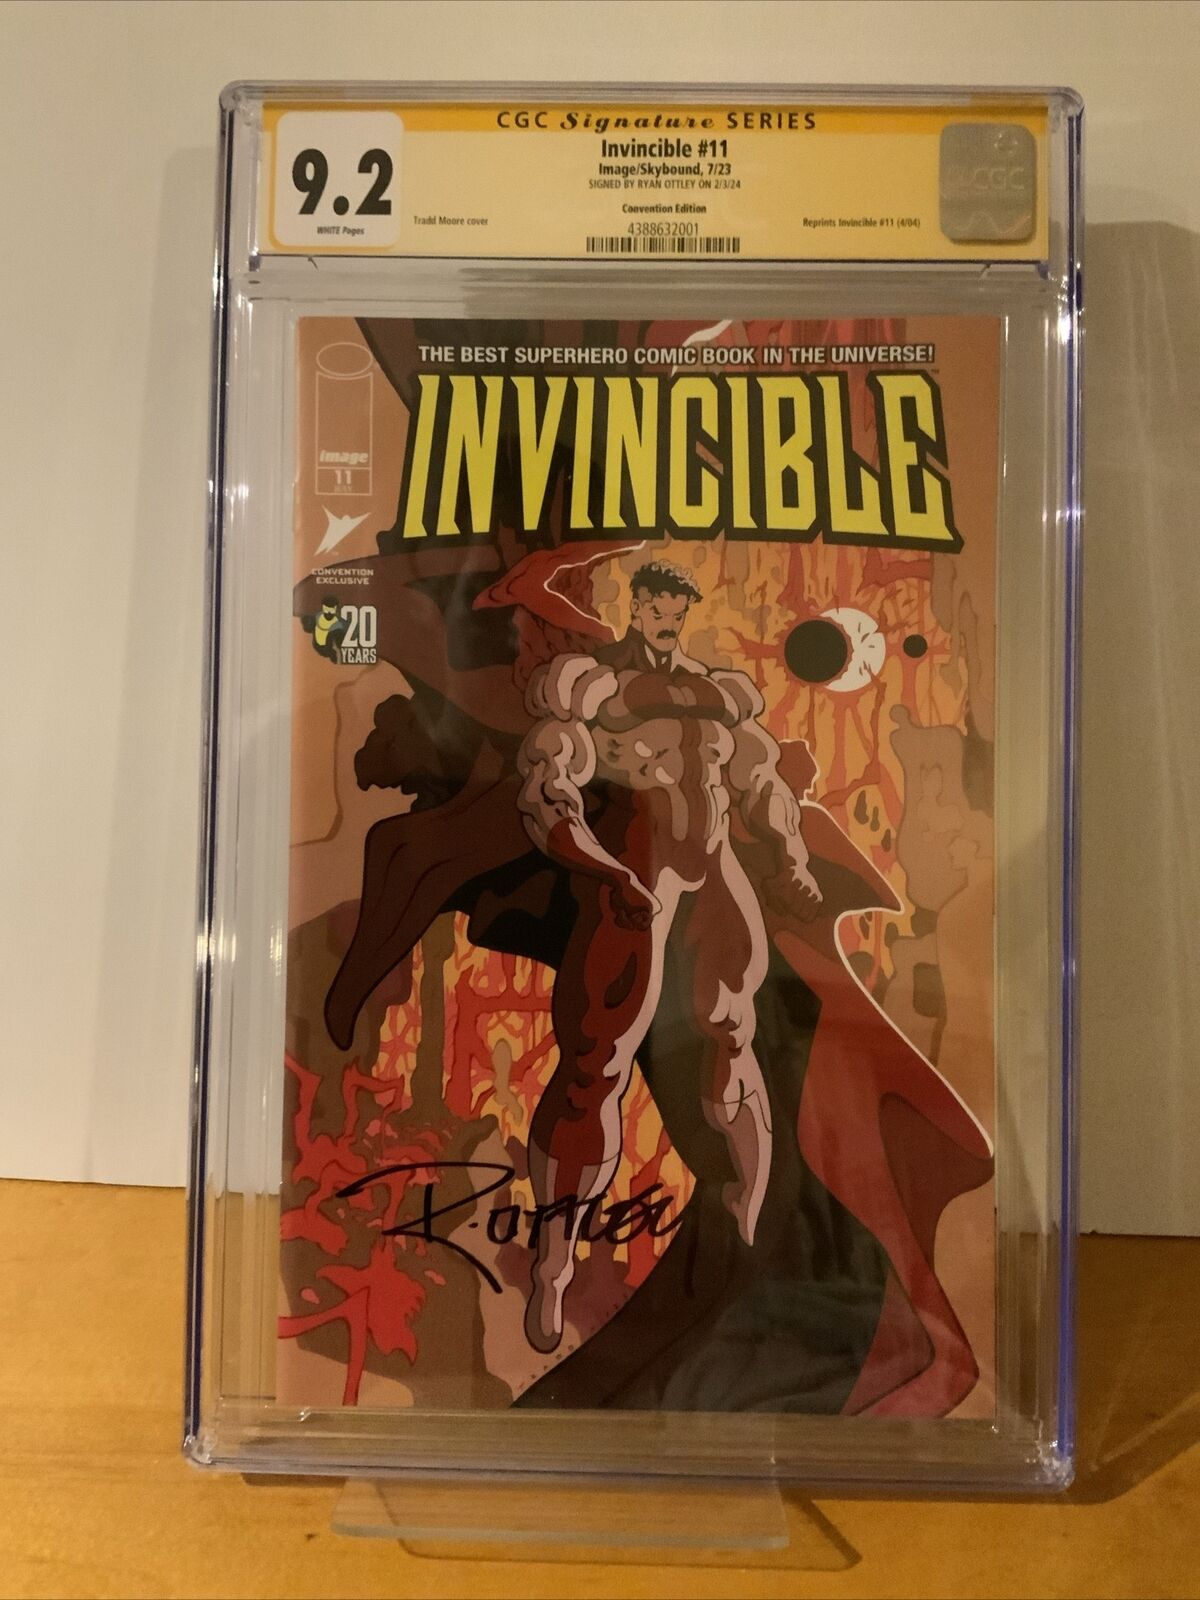 INVINCIBLE #11 TRADD MOORE CONV. ED. CGC 9.2 SS SIGNED BY RYAN OTTLEY OMNIMAN